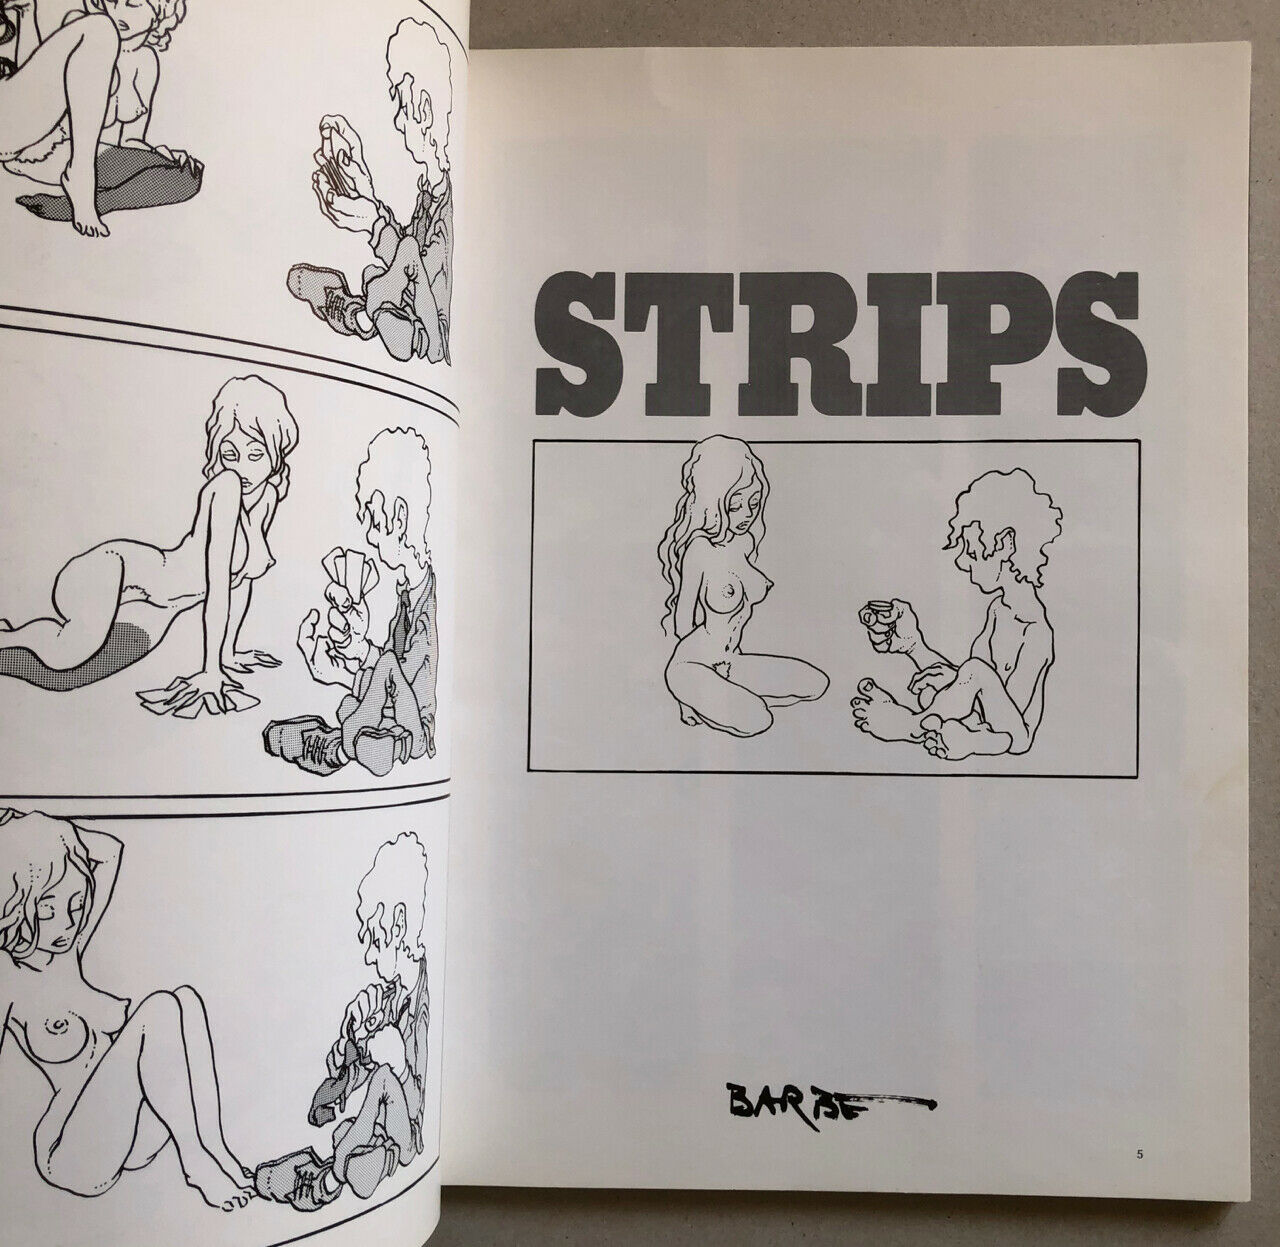 André-François Barbe — Strips — original drawing and sending — Abexpress — 1978.